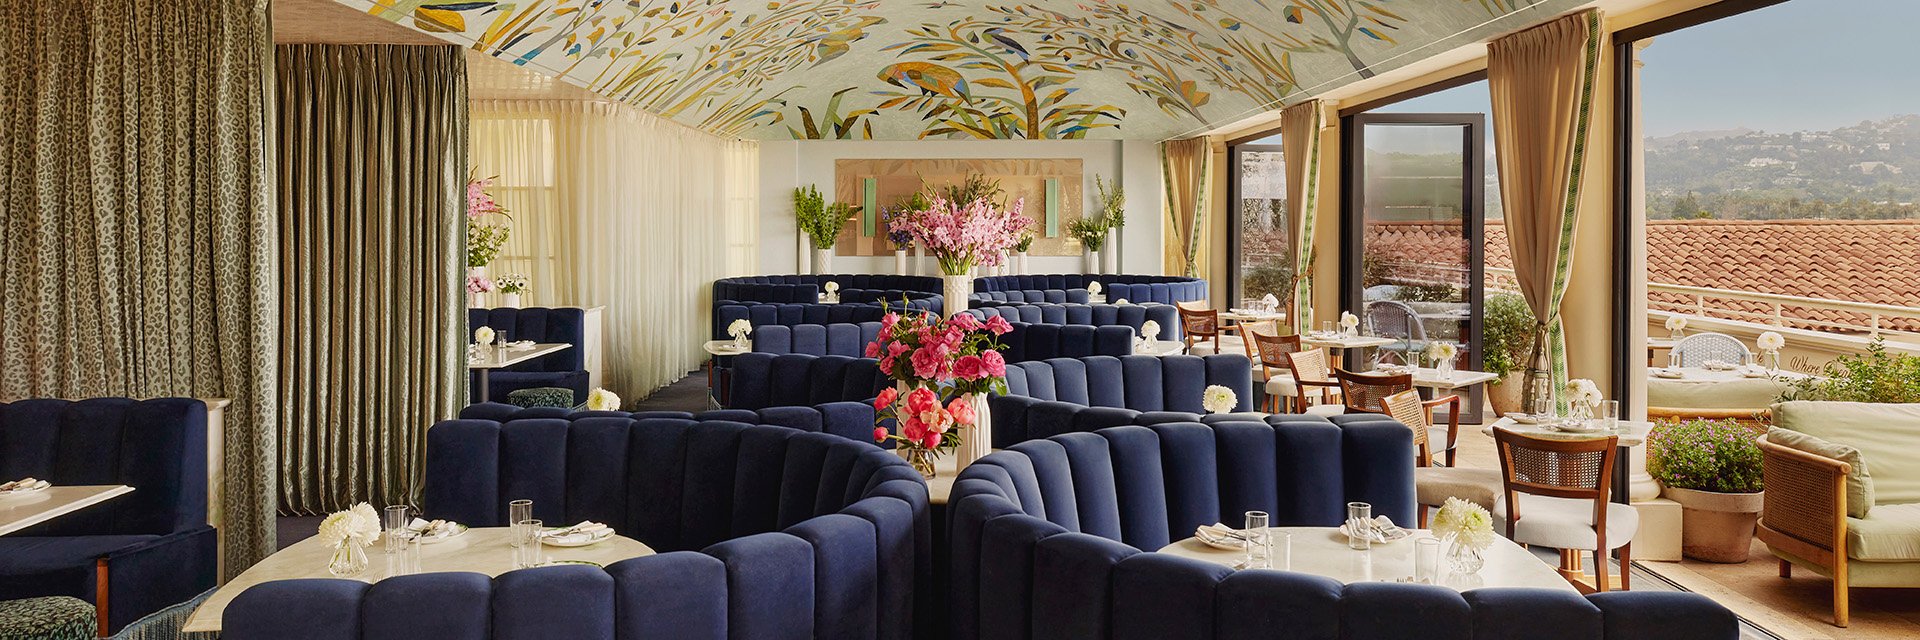 Dark blue booths surrounding tables with small pink roses on them, on the rooftop bar Dante with a ceiling mural above.